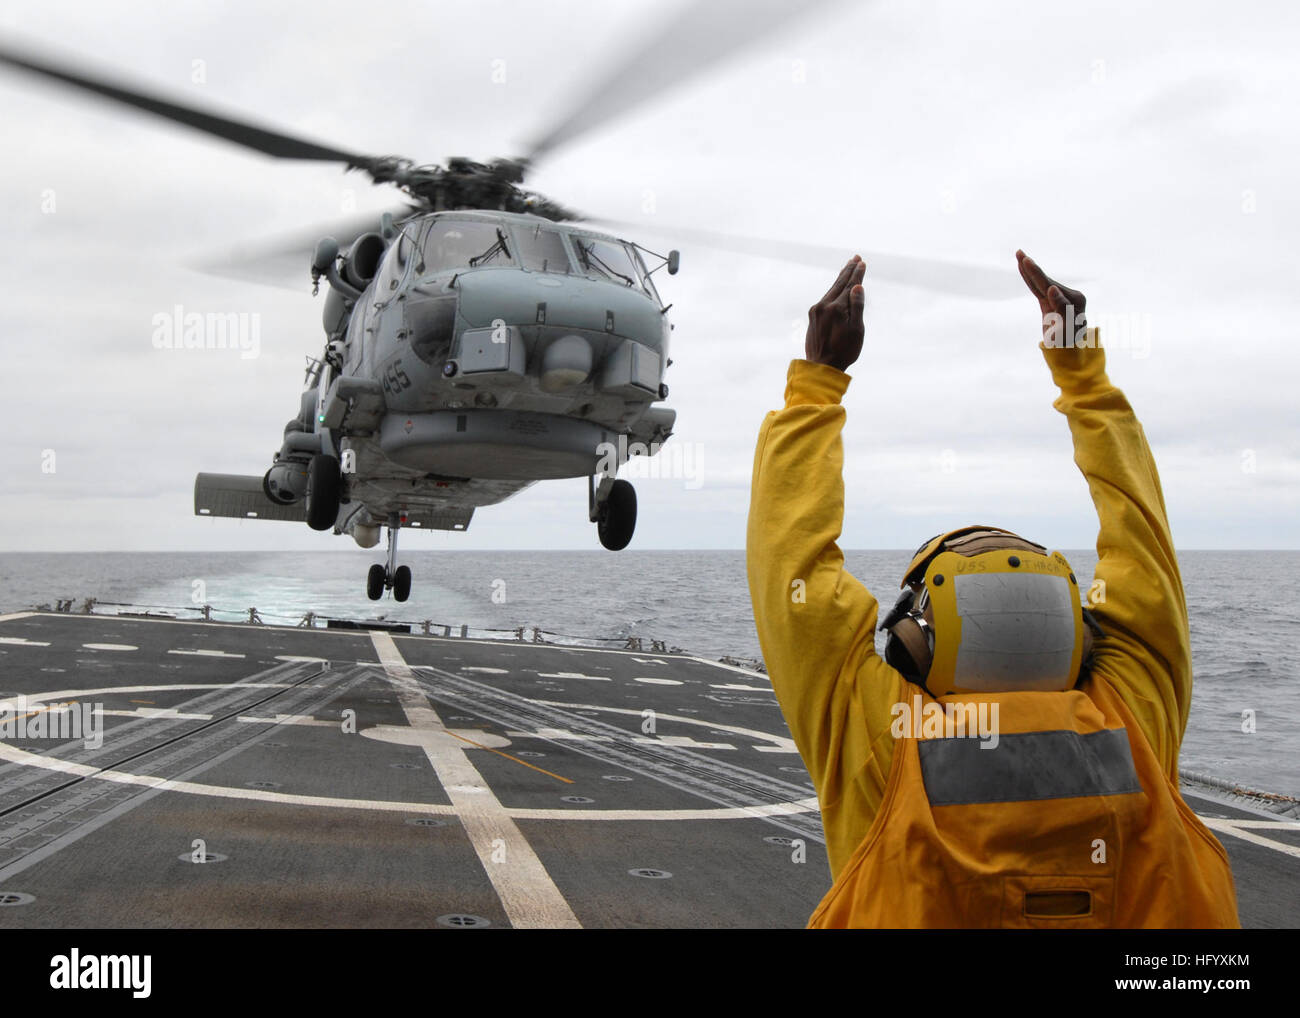 110711-N-ZI300-135 PACIFIC OCEAN (July 11, 2011) A landing signal enlisted signals to the pilots of an SH-60B Sea Hawk helicopter taking off from the guided-missile frigate USS Thach (FFG 43). The SH-60B Sea Hawk is assigned to Anti-Submarine Squadron Light (HSL) 44 and is embarked aboard USS Boone (FFG 28). Thach and Boone are deployed to South America supporting Southern Seas 2011. (U.S. Navy photo by Mass Communication Specialist 1st Class Steve Smith/Released) US Navy 110711-N-ZI300-135 A landing signal enlisted signals to the pilots of an SH-60B Sea Hawk helicopter taking off from the gui Stock Photo